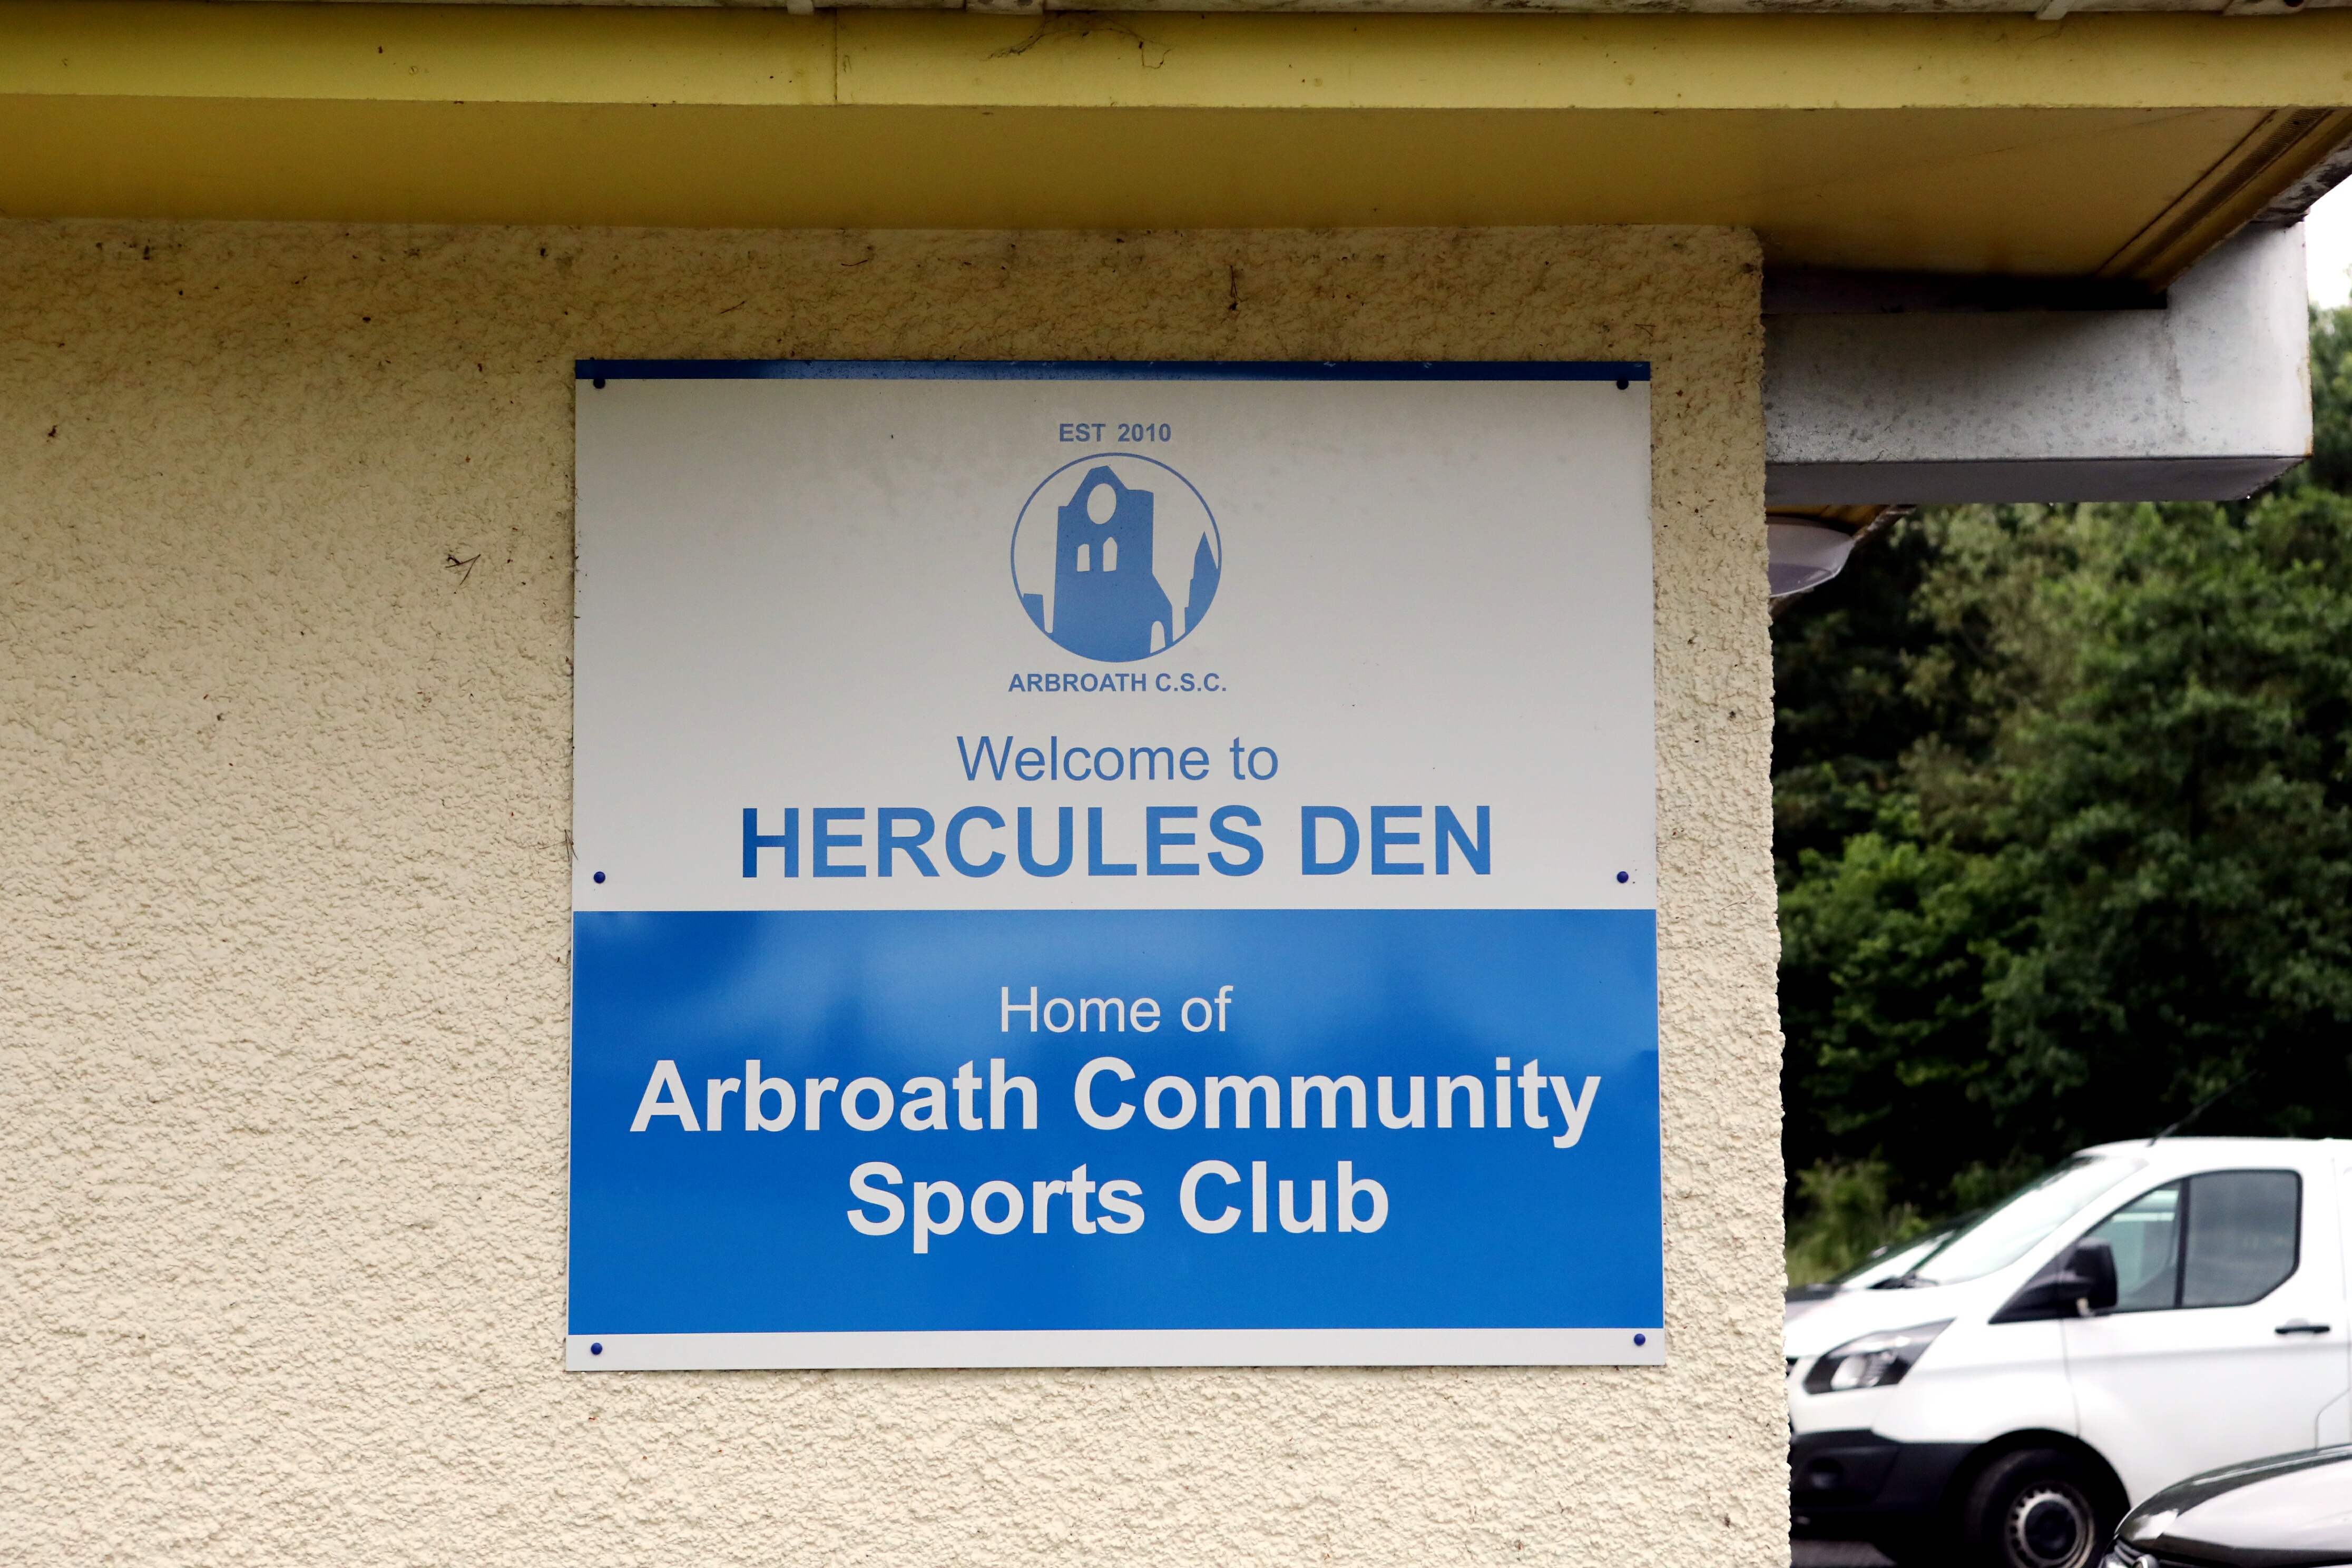 ACSC has secured a long-term lease extension for the Hercules Den facilities.